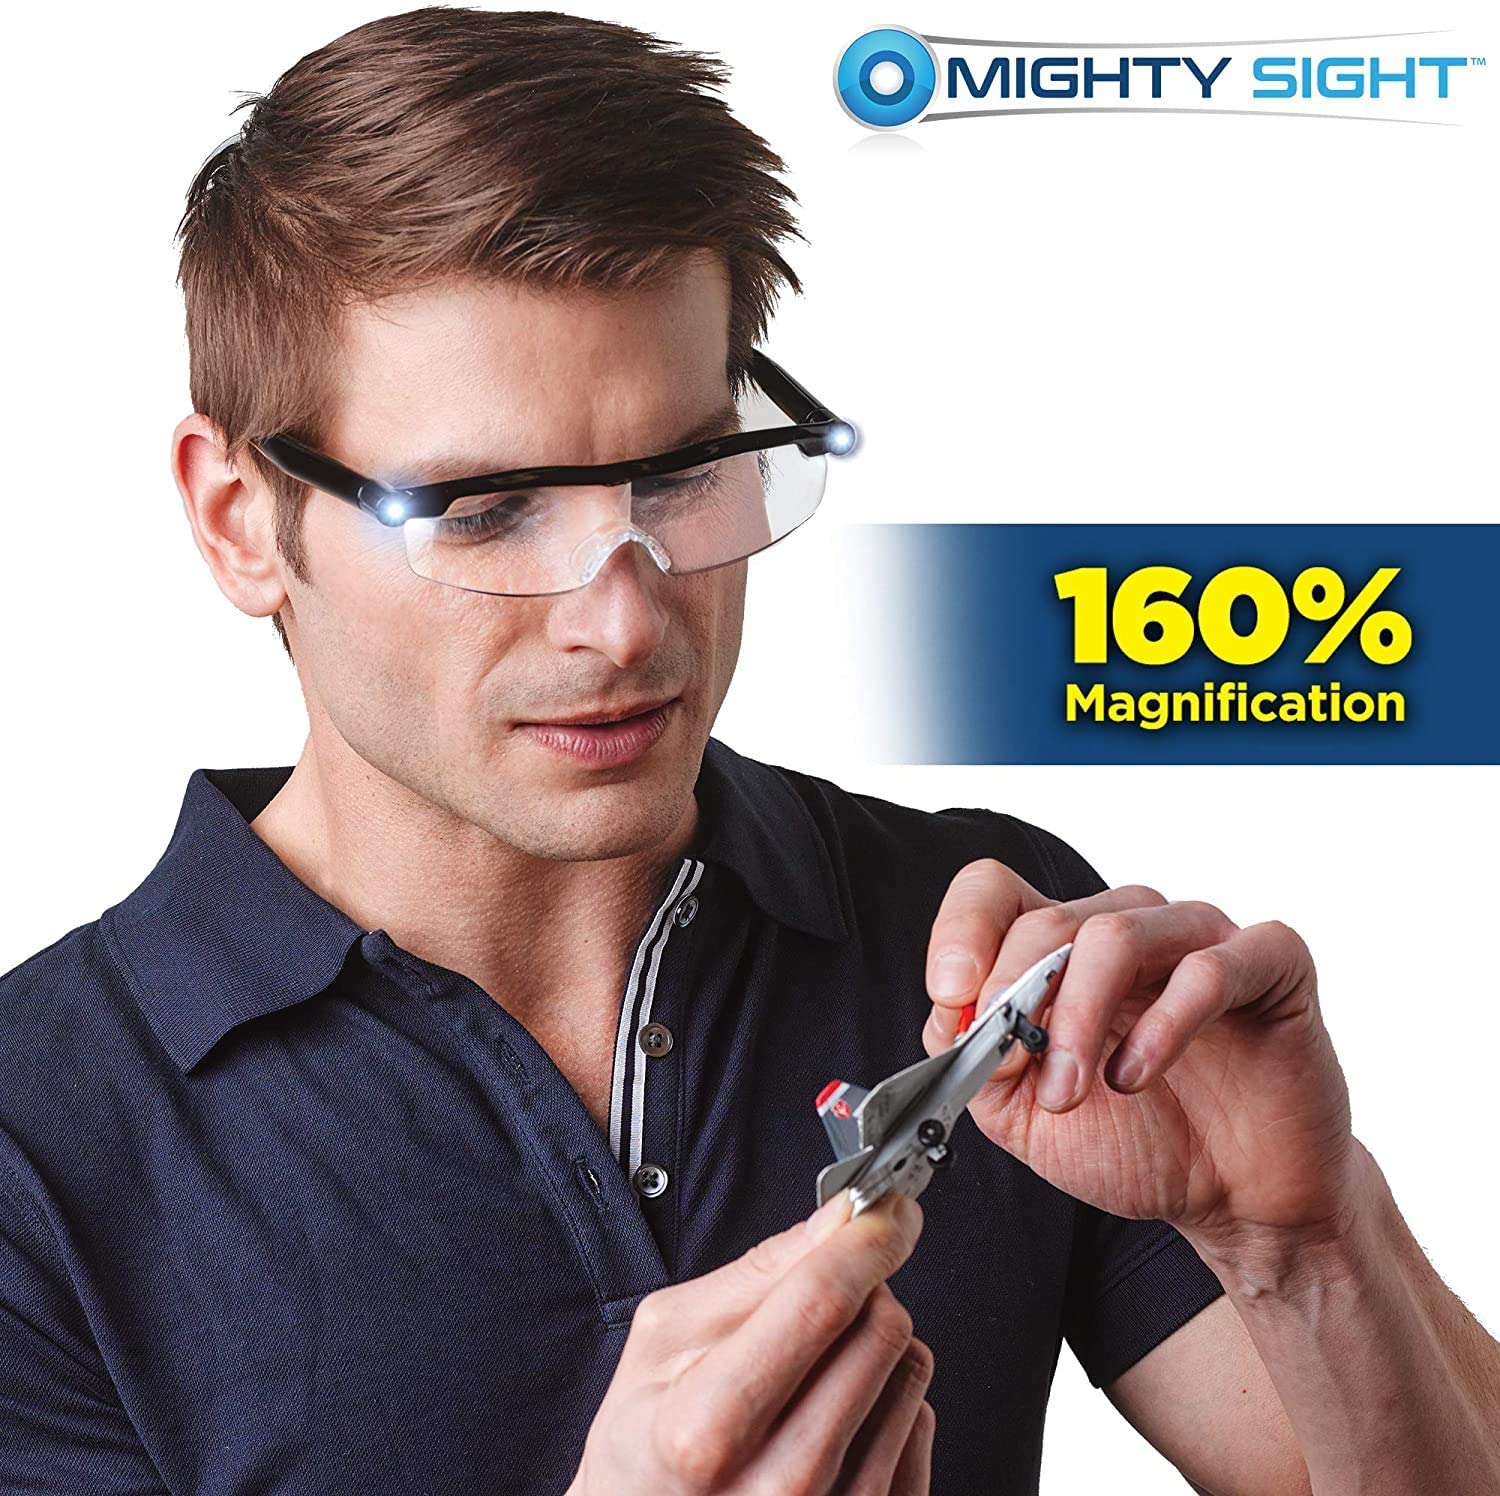 Mighty Sight Magnifying Glasses with LED Light & Travel Case - Great Eyeglasses for Readers, Women, Men, Kids - Use for Close Work or Reading Small Print & Labels - As Seen on TV